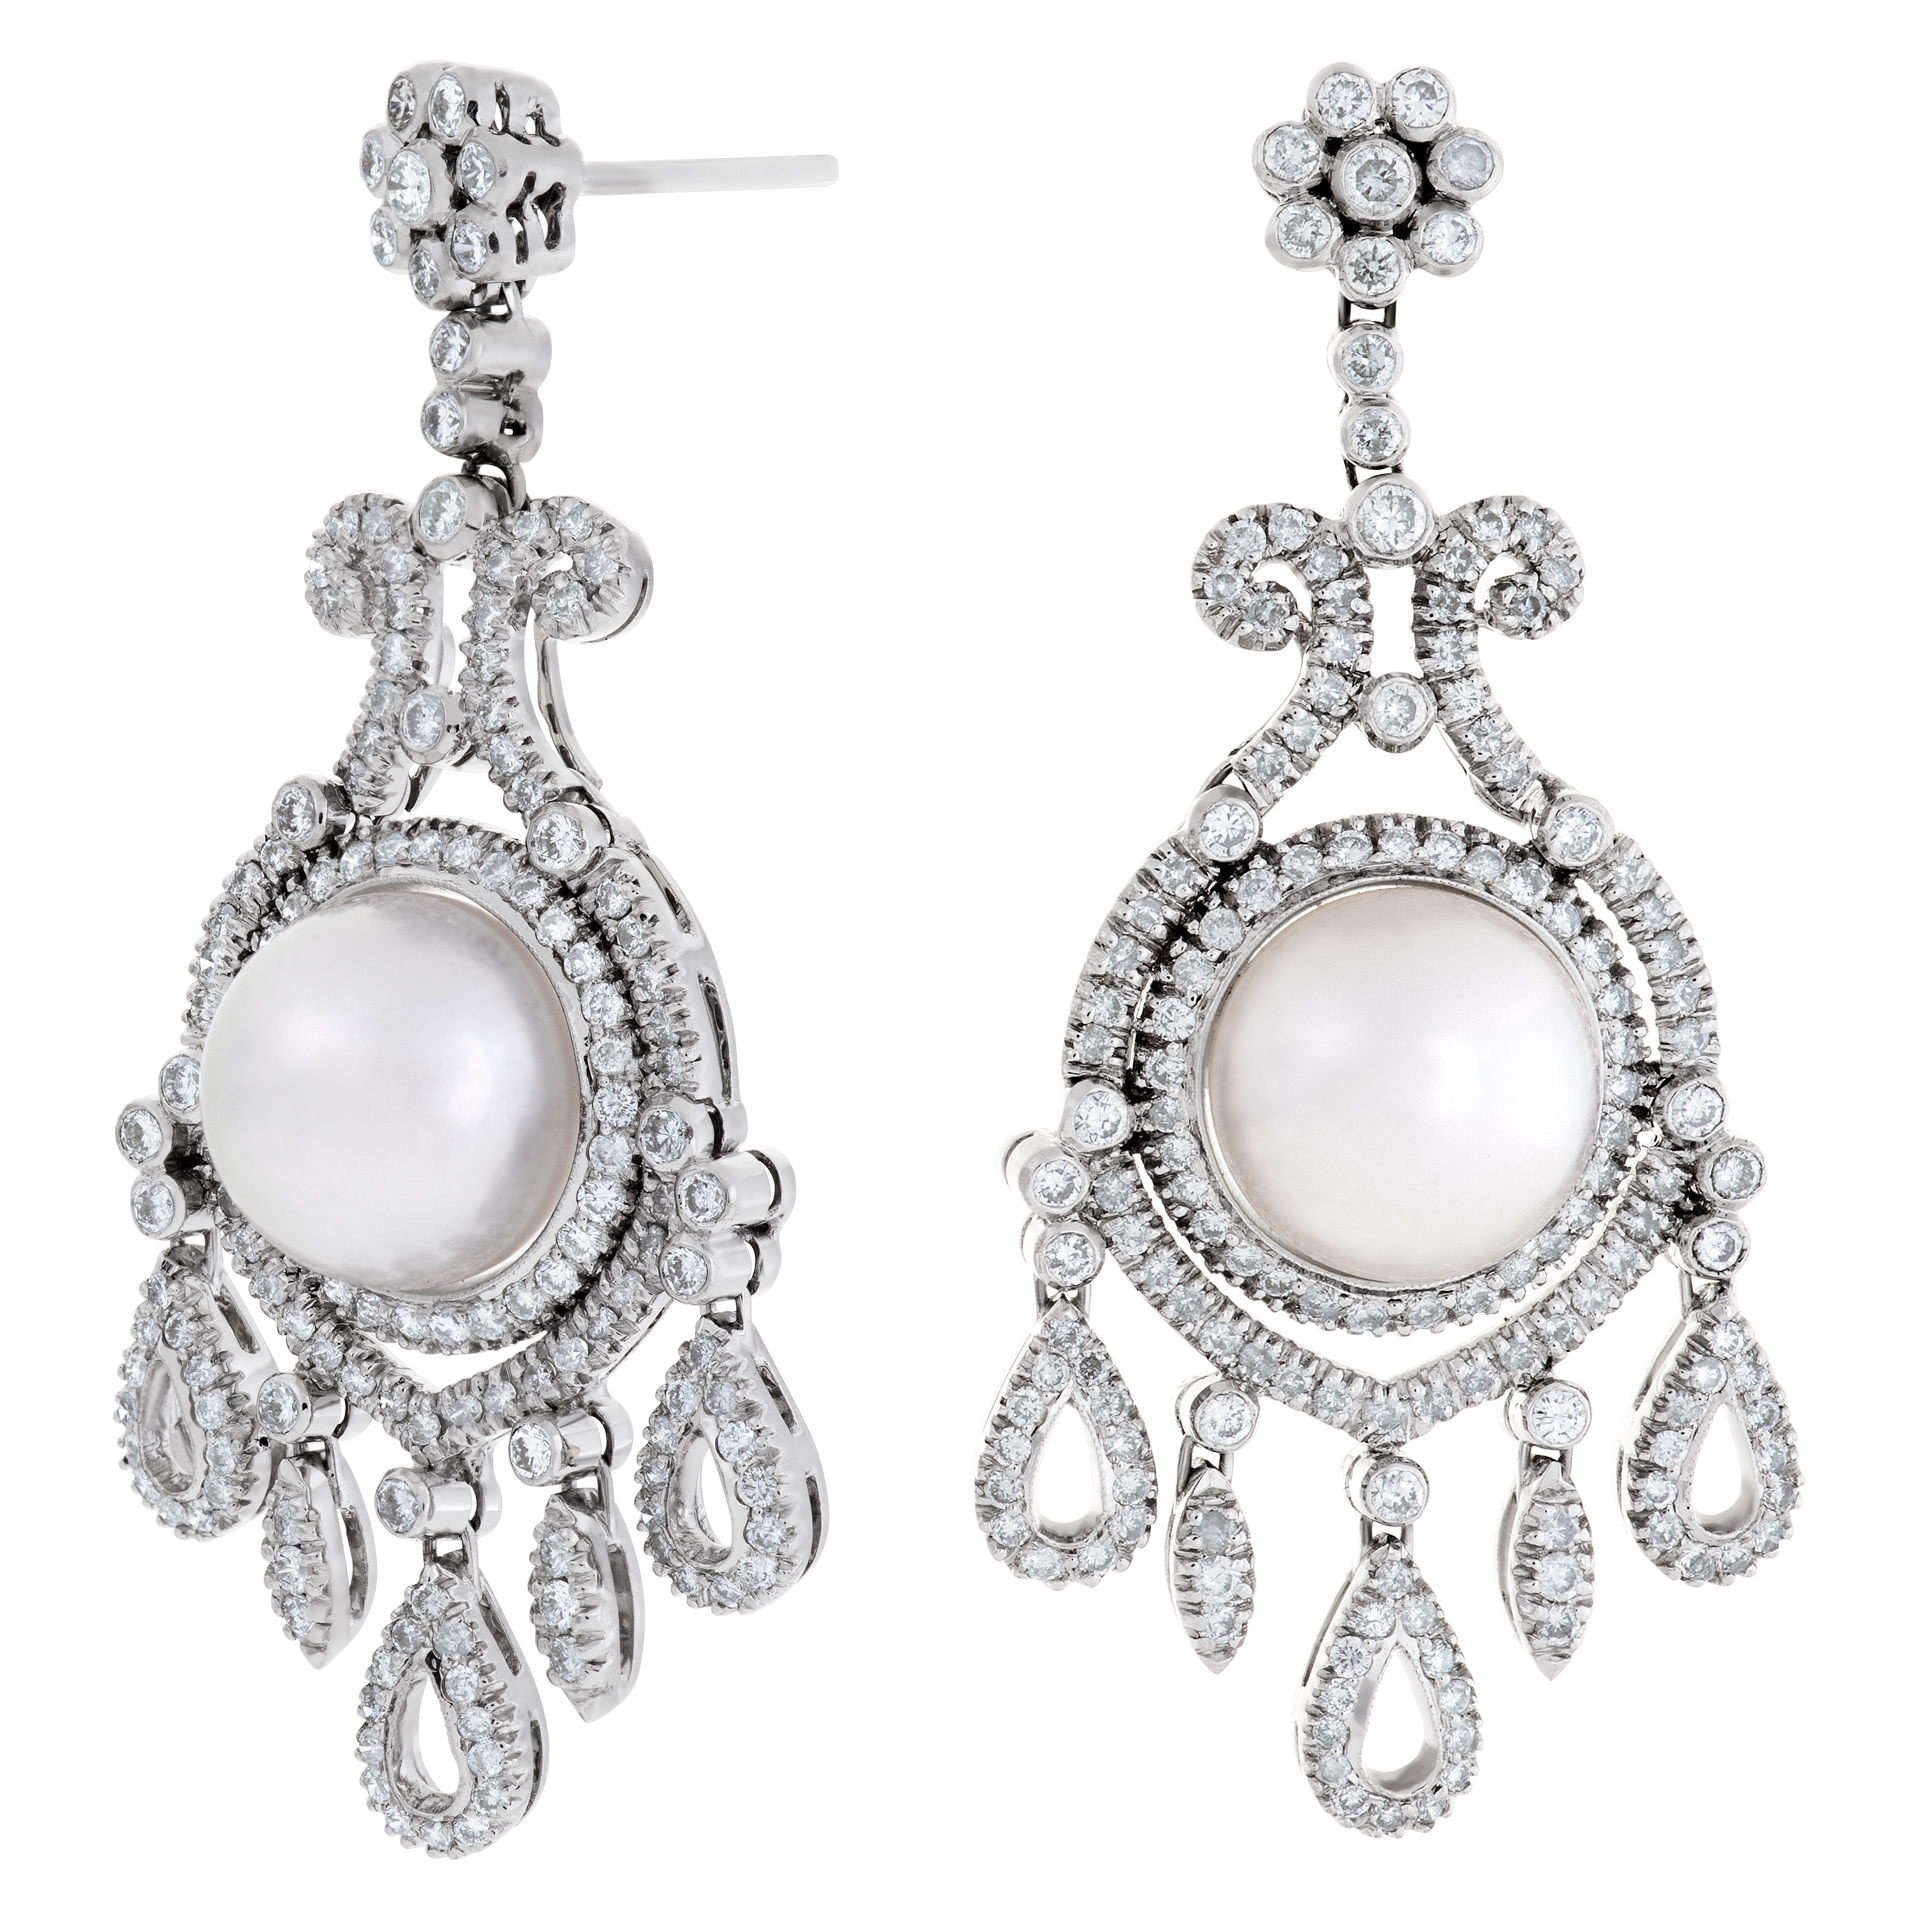 18k white gold pearl earrings with 3.89 carats in diamonds